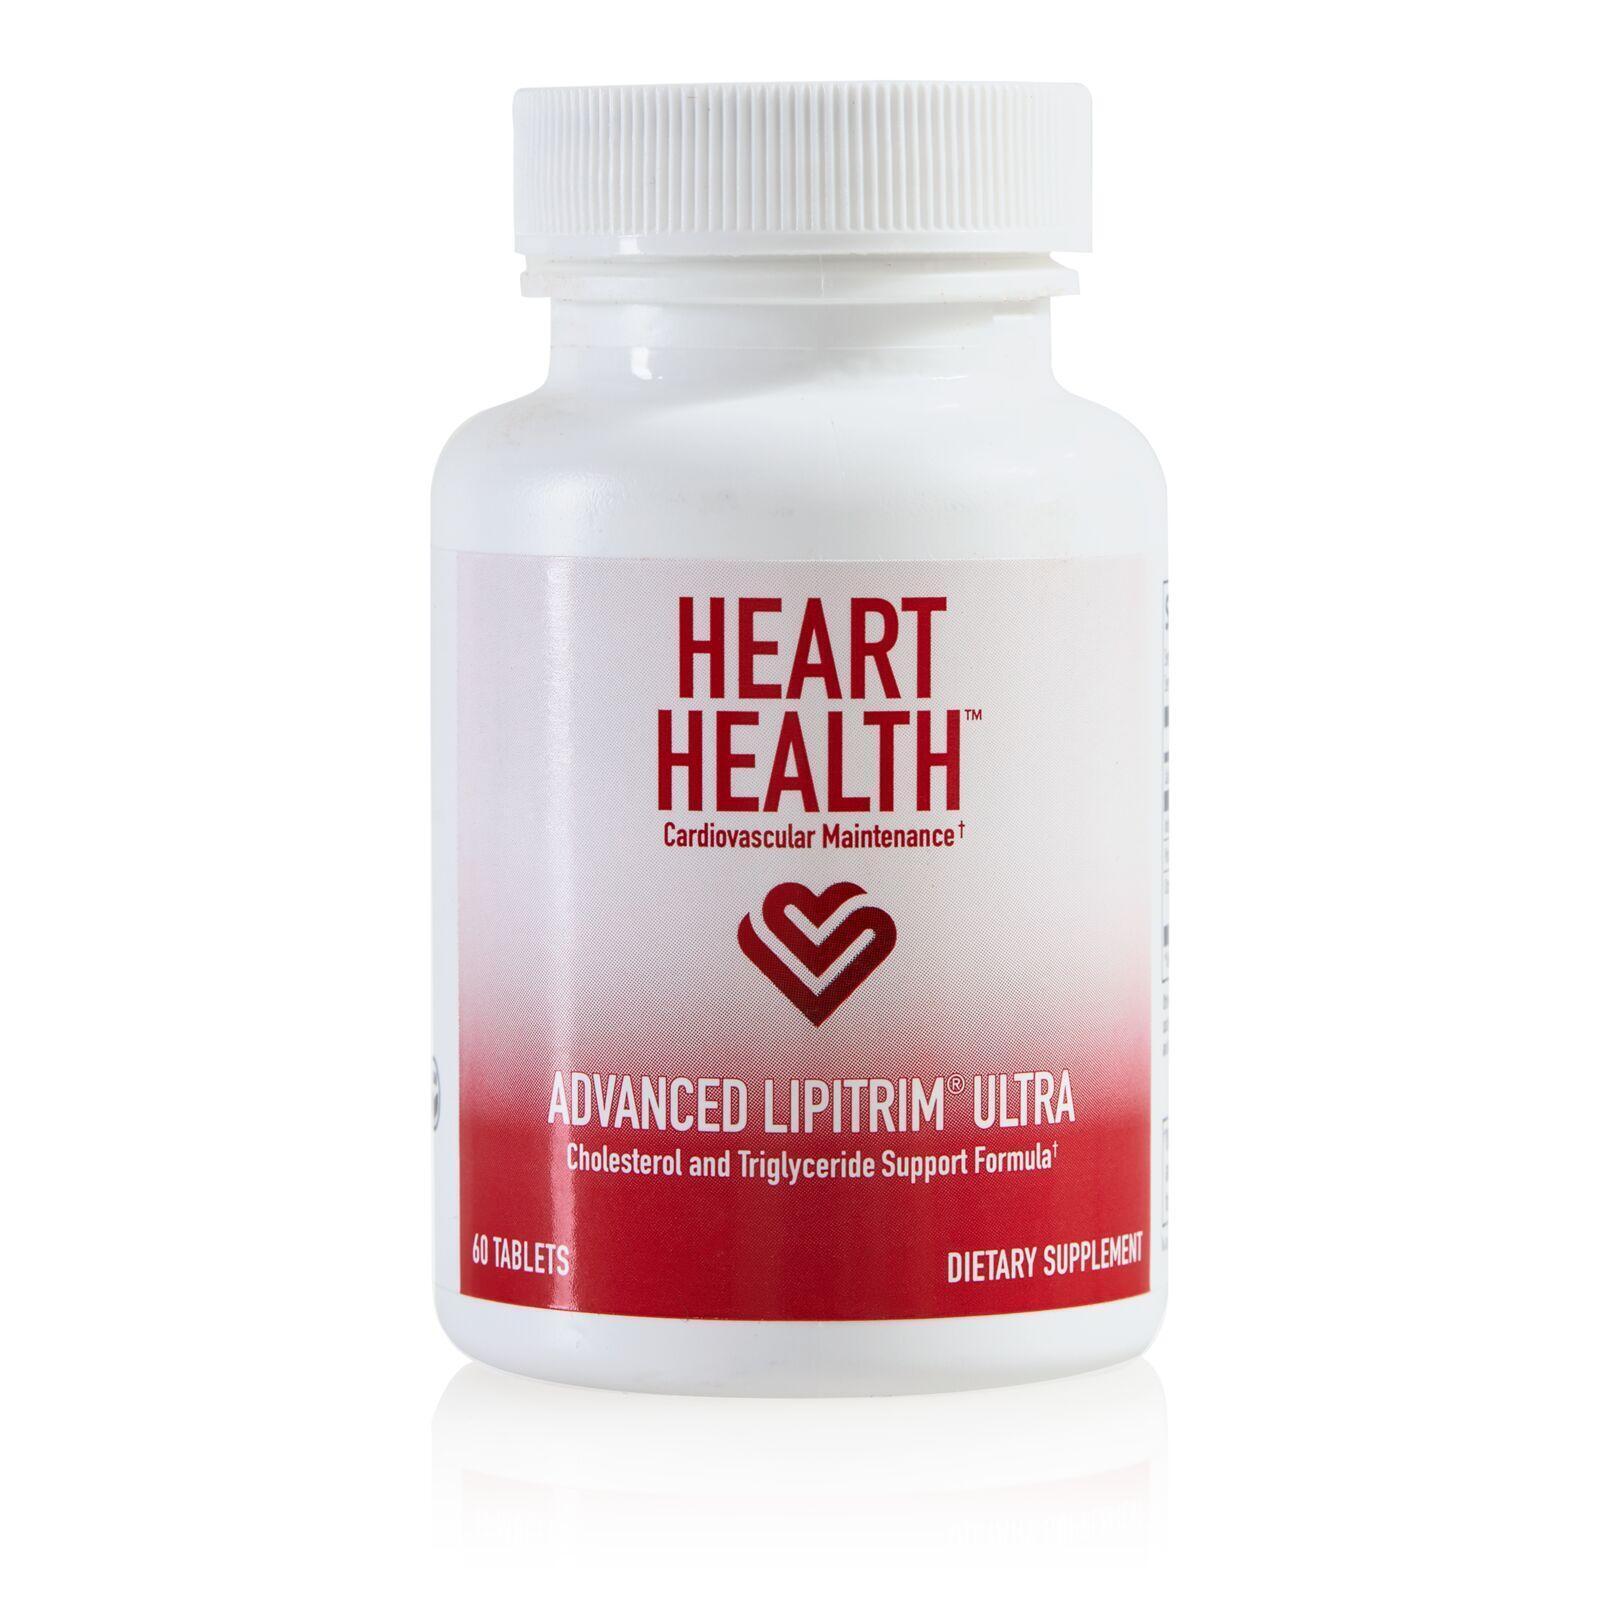 Heart Health Advanced LipiTrim Ultra (Cholesterol and Triglyceride Support Formula),Vegan, Essentials, Product Tested no detectable GMO